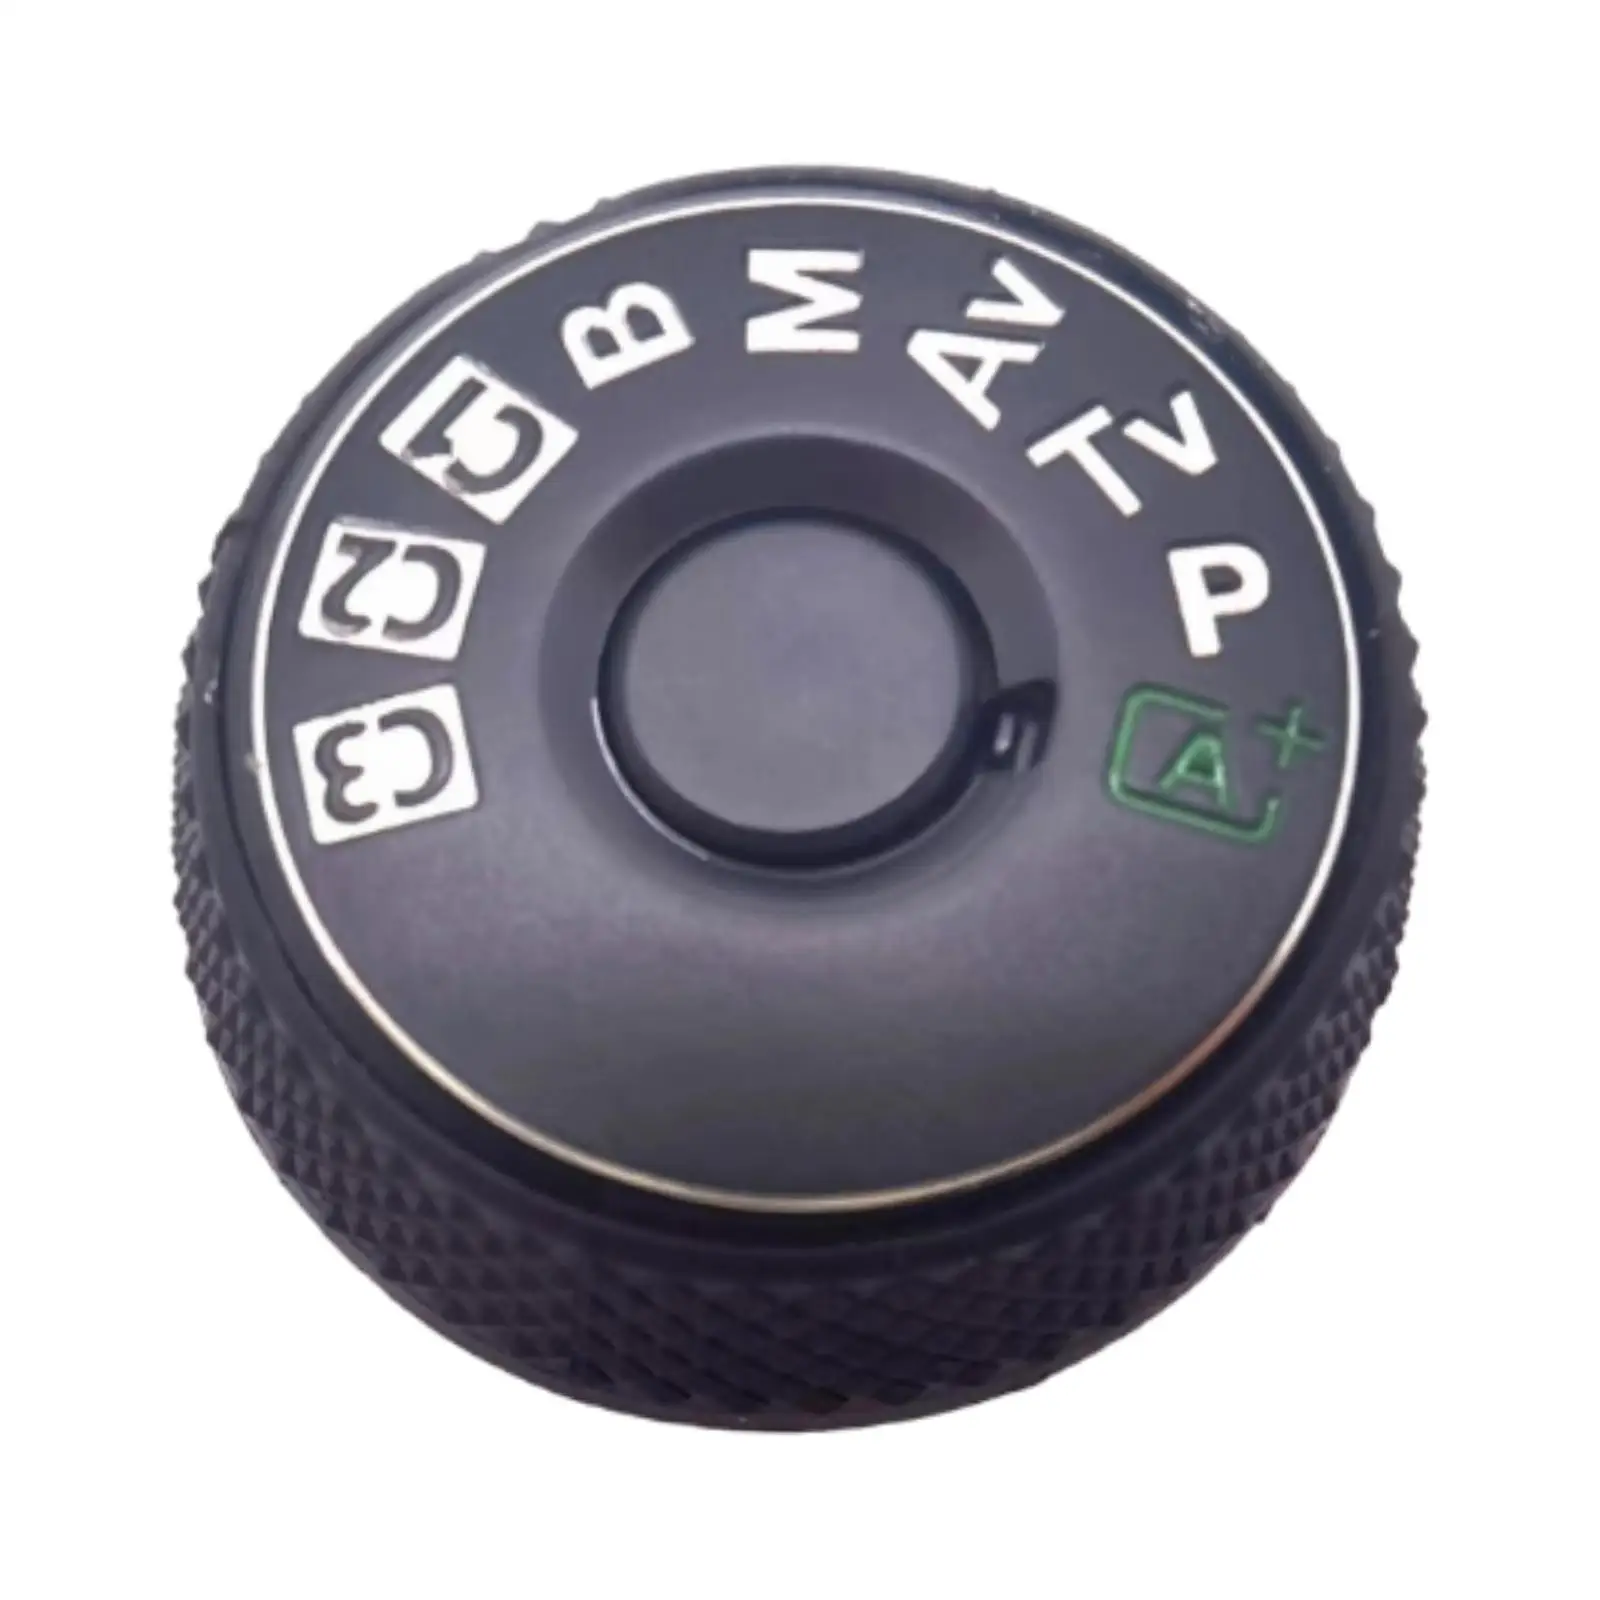 Function Dial Model Button Replacement Digital Camera Repair Part for Canon 5D4 Quality High Reliability Easy to Install Premium